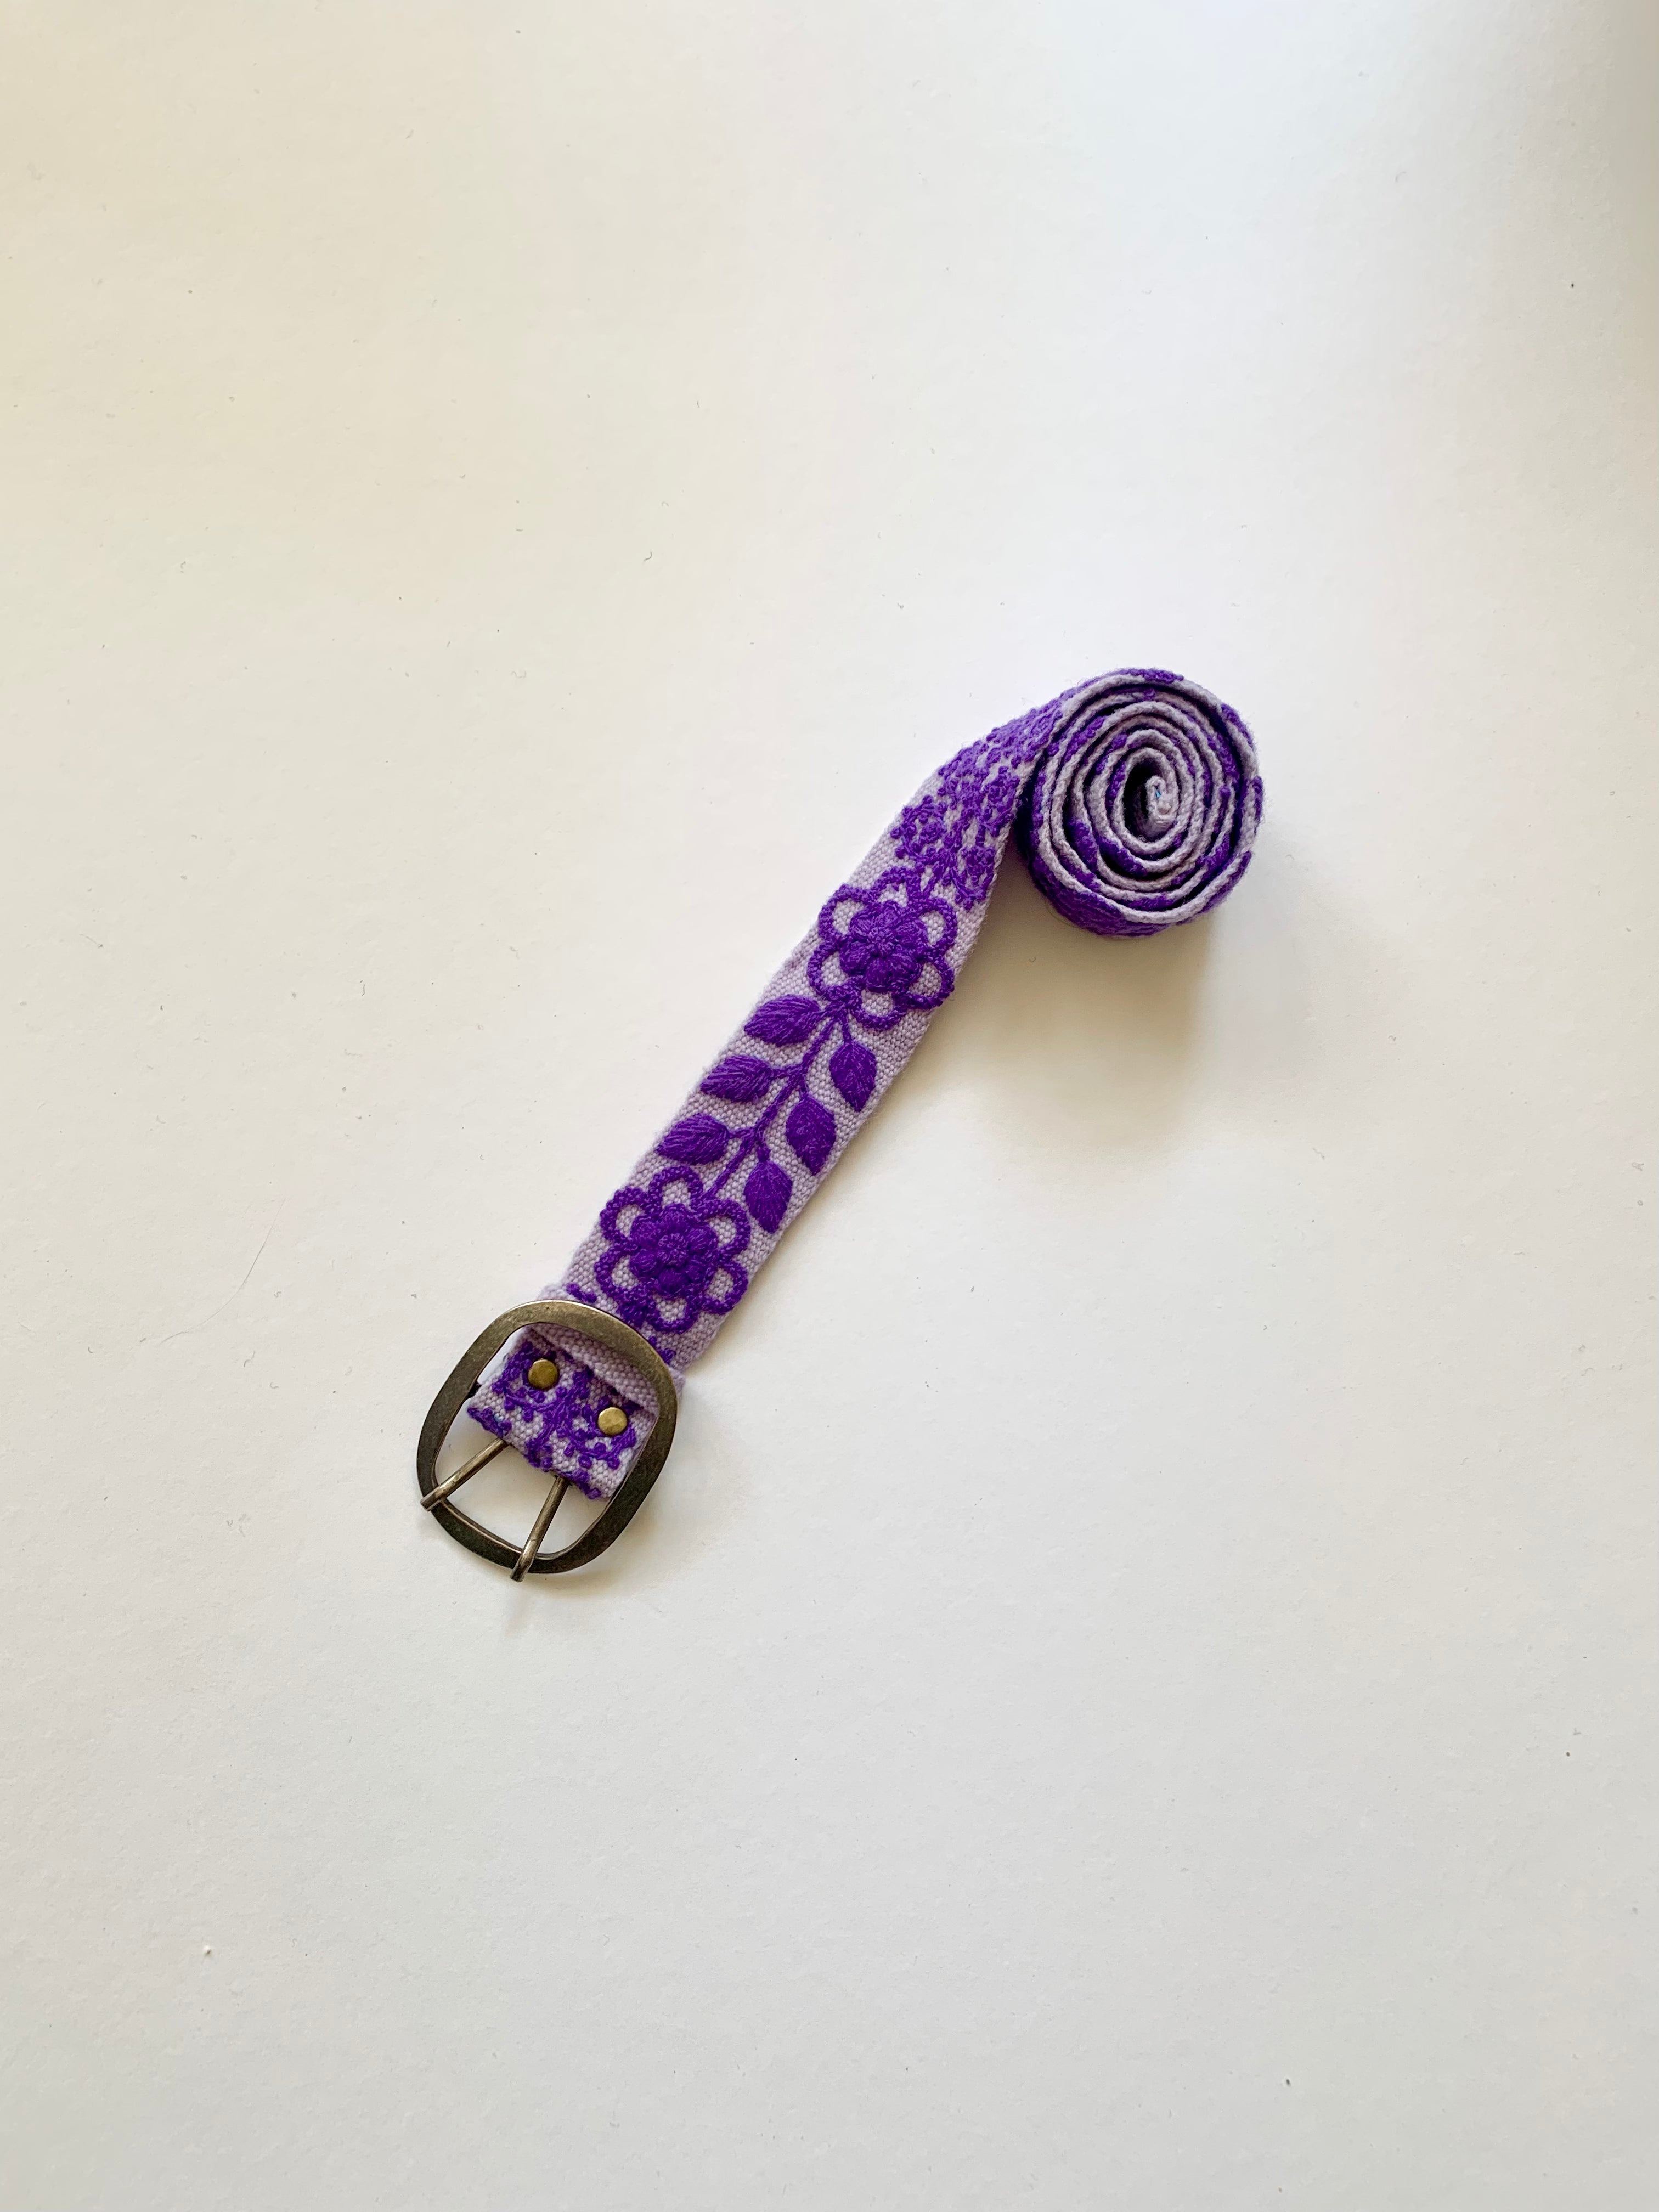 Eliza Embroidered Belt: A hand-loomed wool belt with a purple floral and leaf design